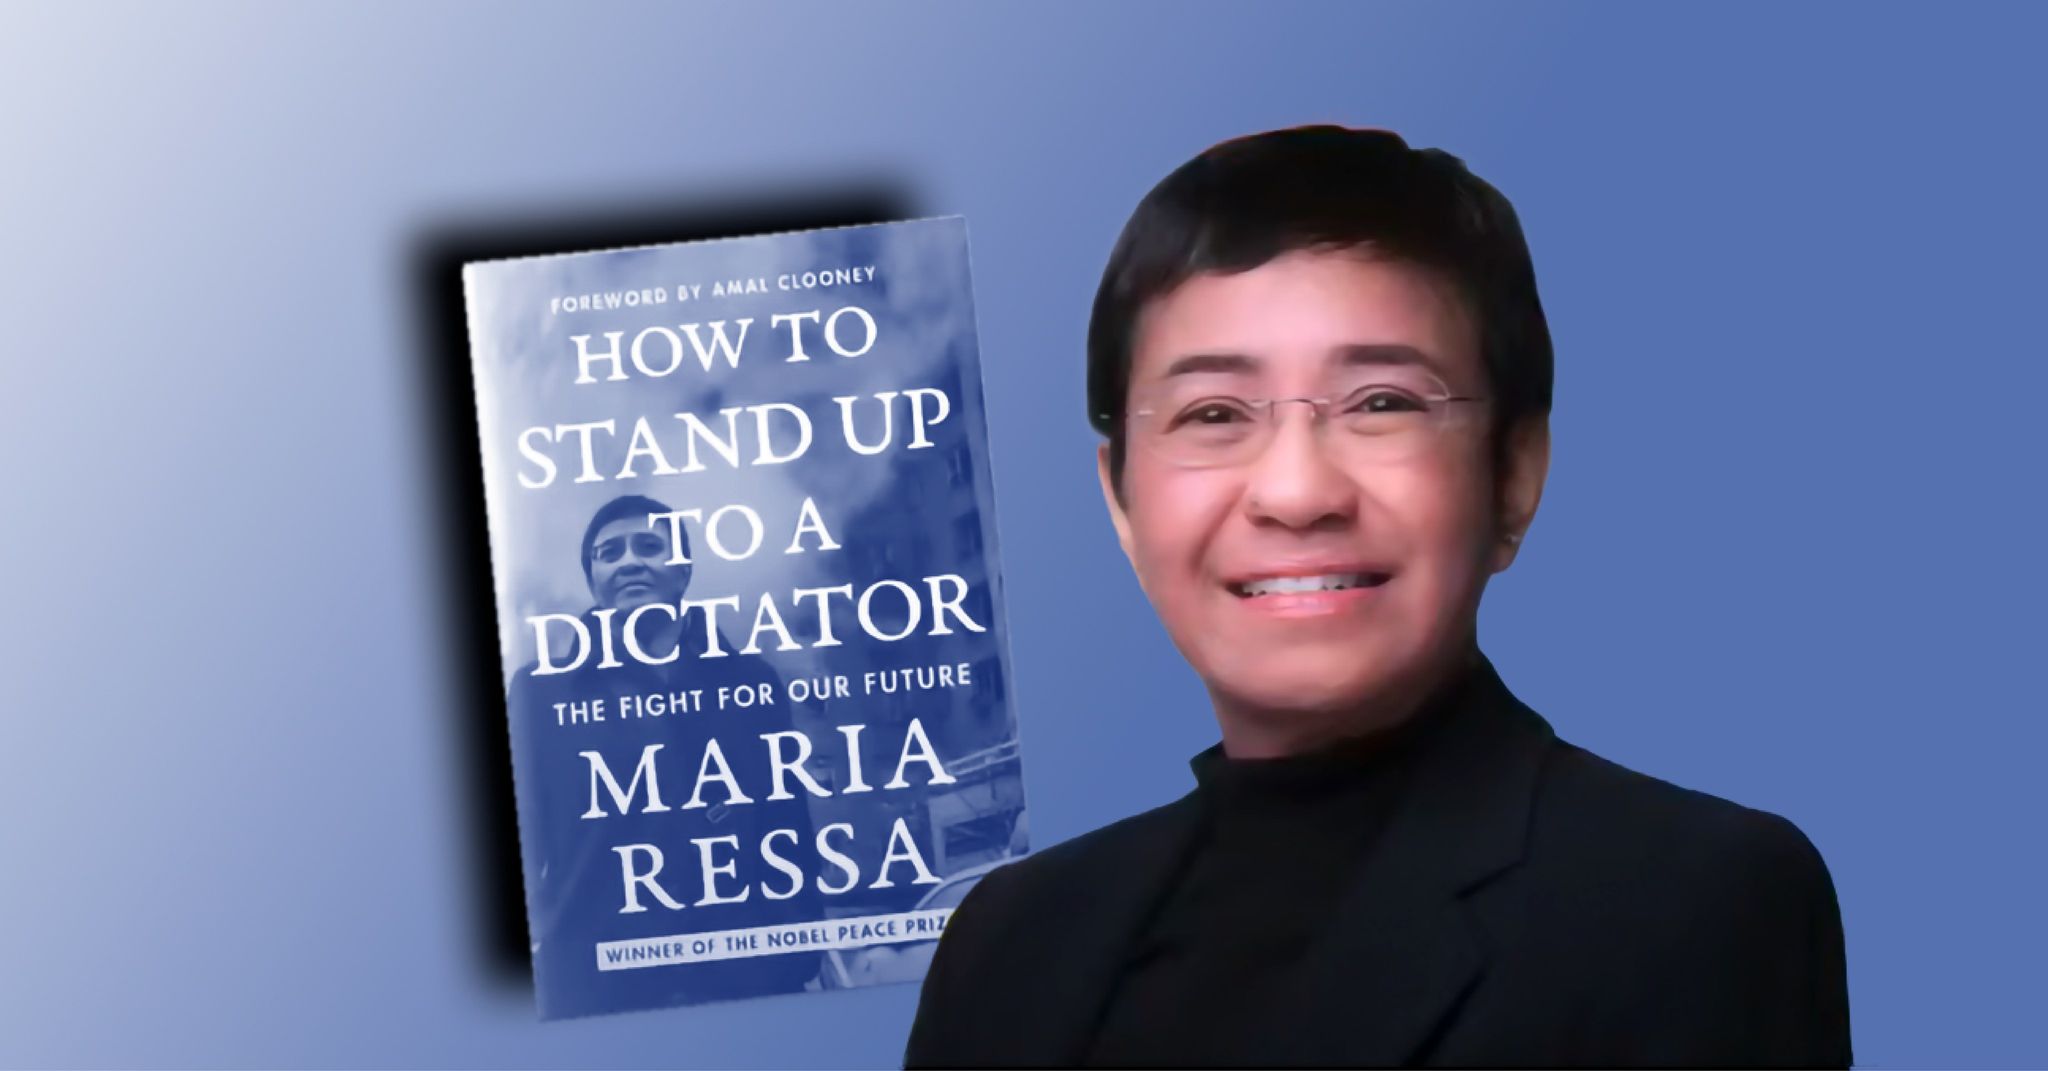 Maria Ressa shows us how to stand up to a dictator